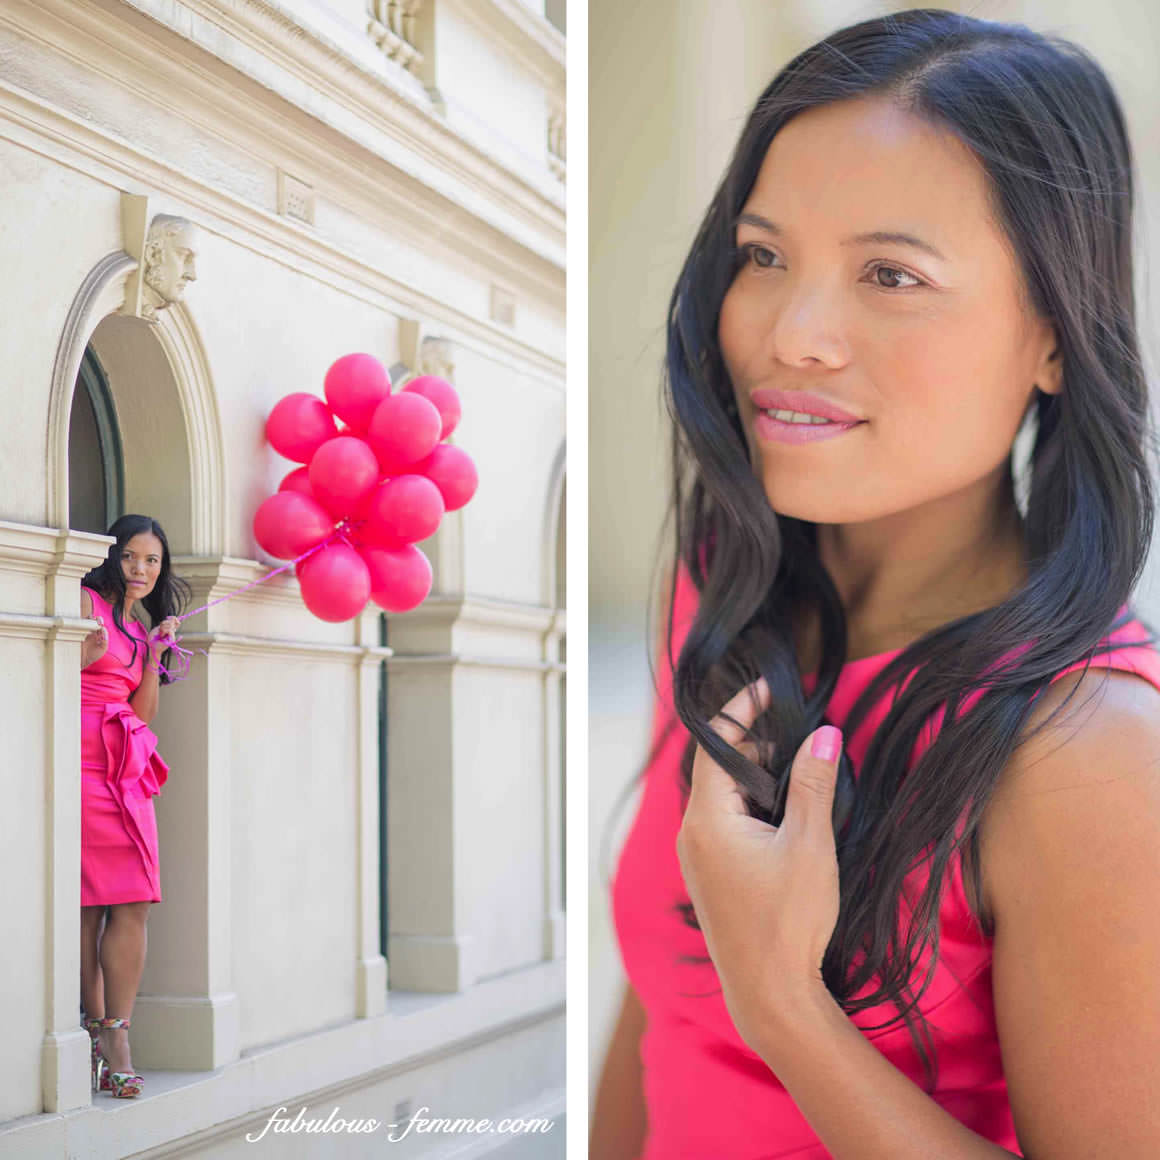 photos of girl with pink balloons